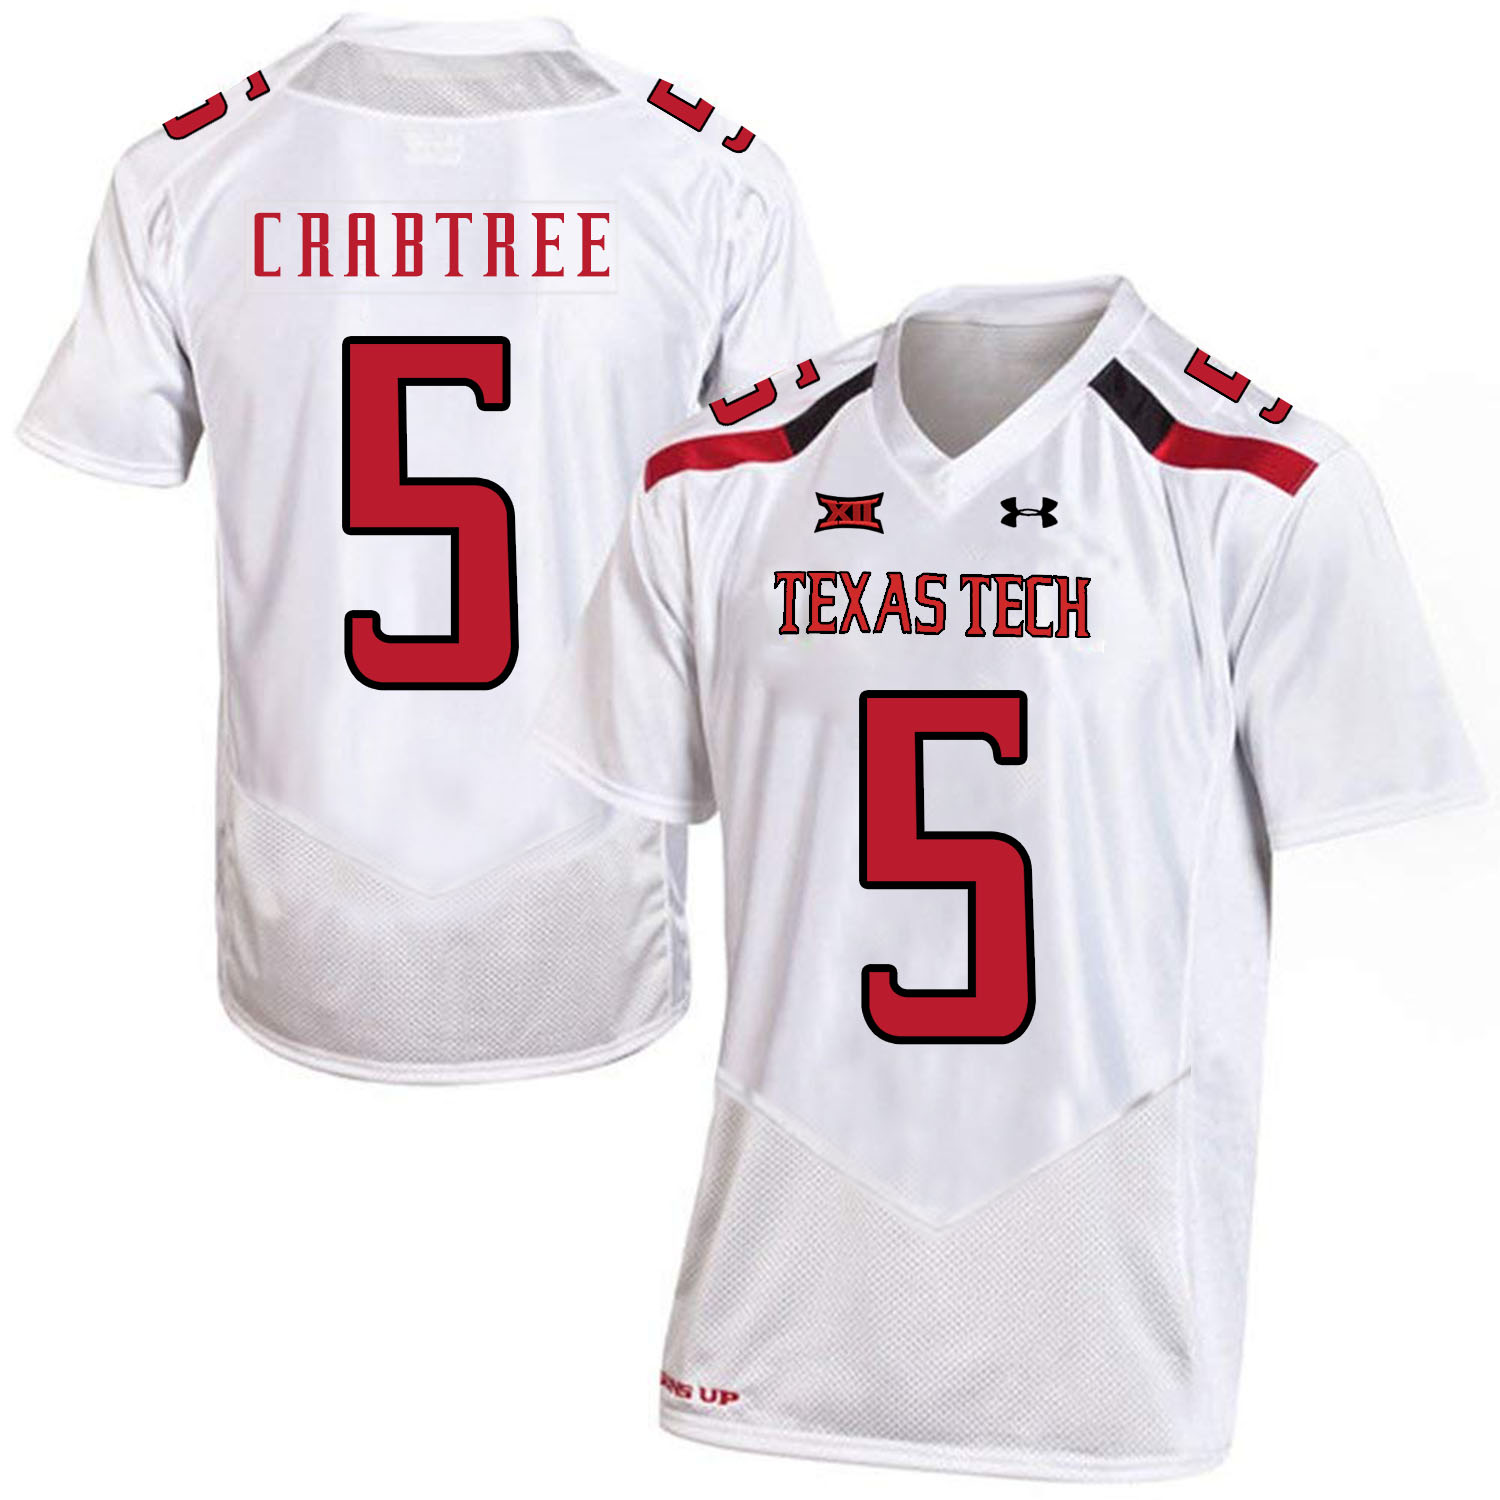 Texas Tech Red Raiders 5 Michael Crabtree White College Football Jersey